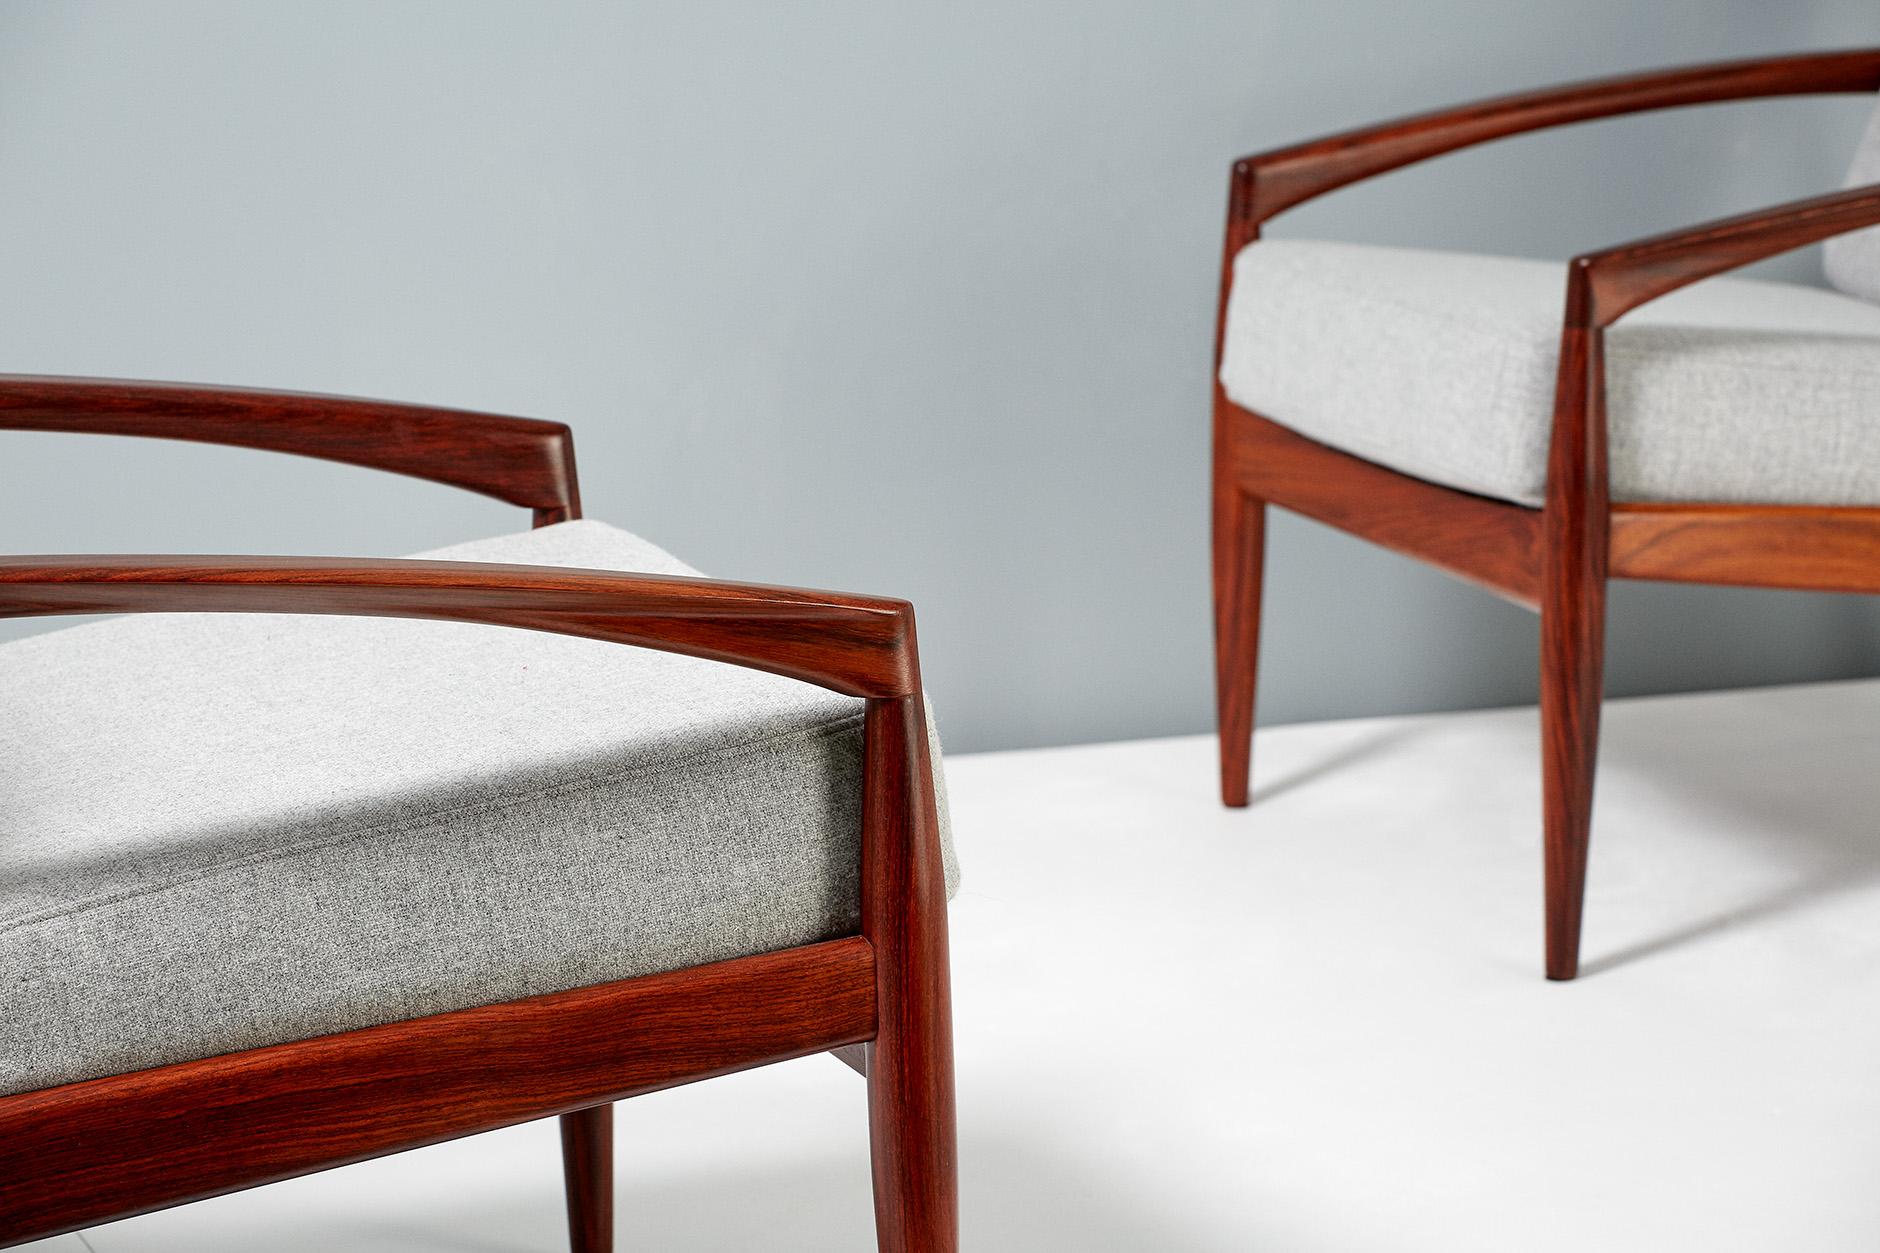 Wool Kai Kristiansen Pair of Rosewood Paper Knife Lounge Chairs, 1950s For Sale